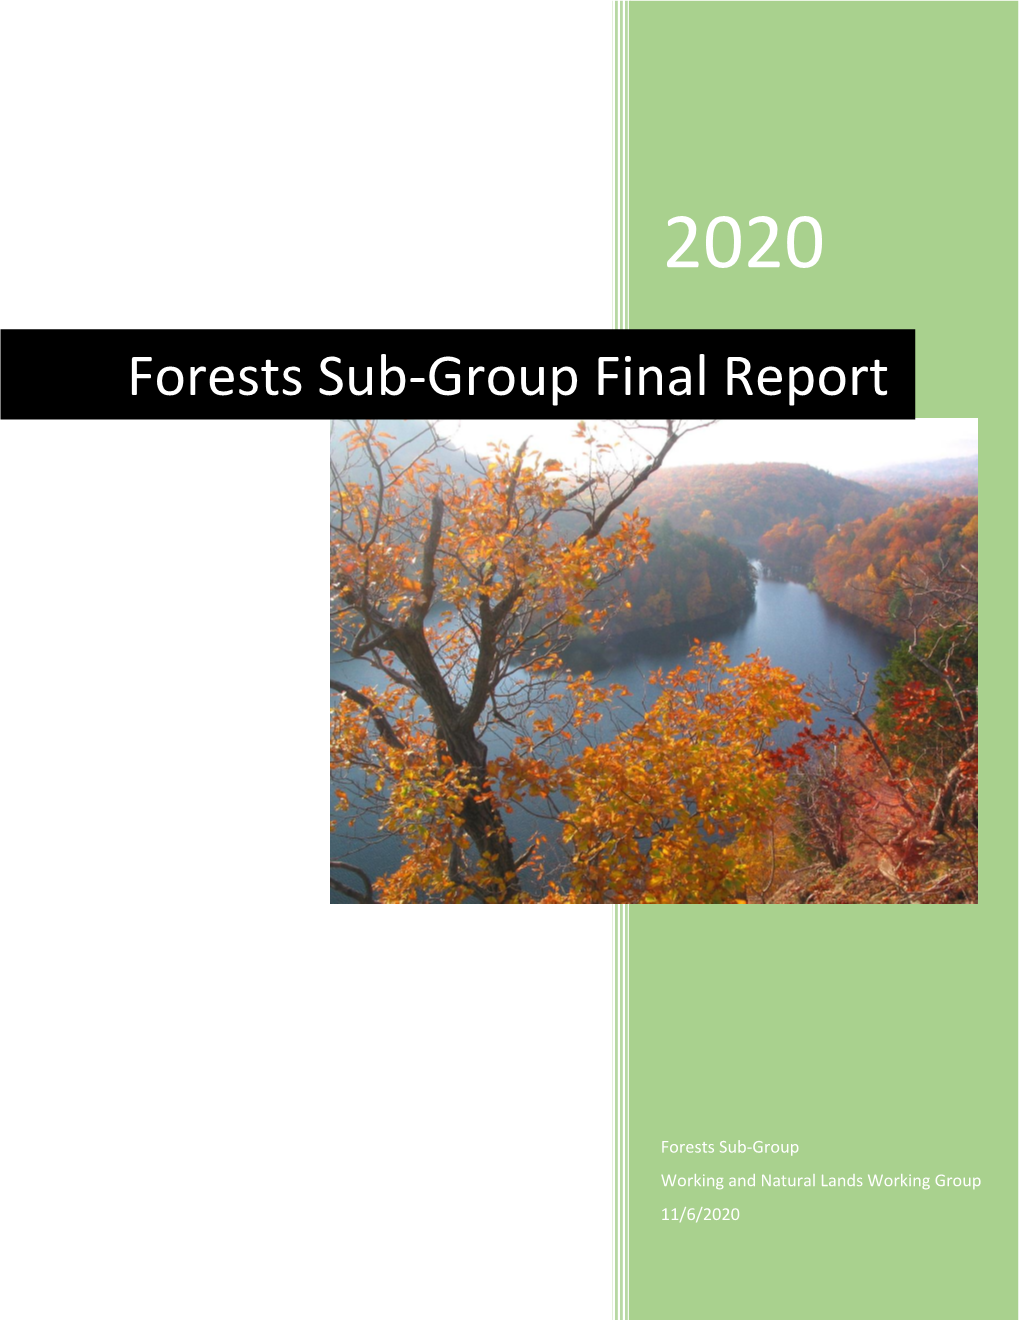 Forests Sub-Group Final Report